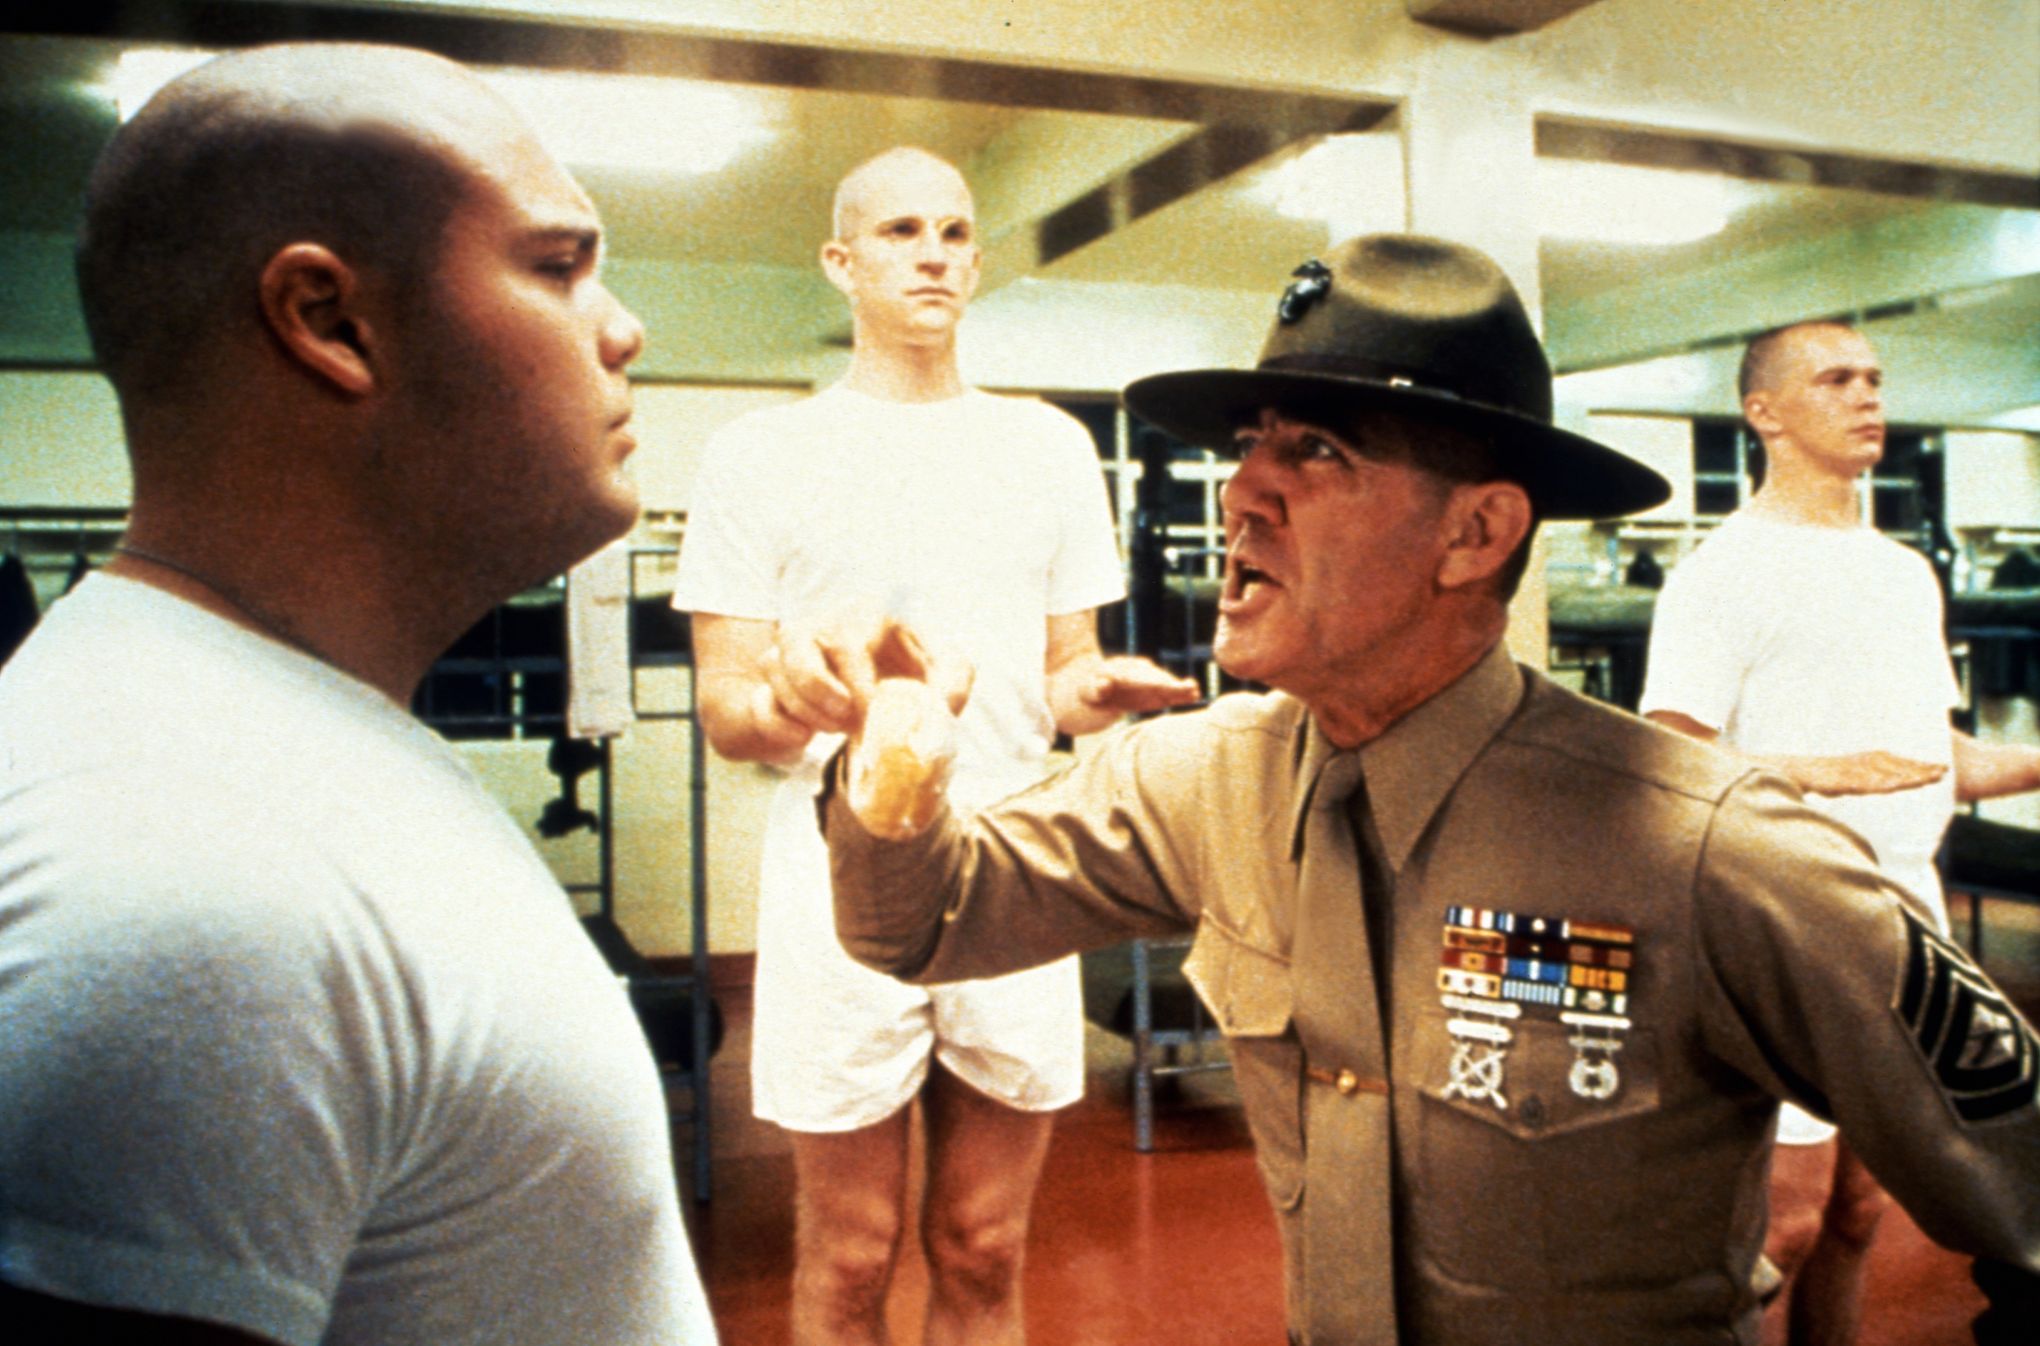 FULL METAL JACKET 1987 DIRECTED BY STANLEY KUBRICK Vincent d'Onofrio, Matthew Modine and R.Lee Ermey